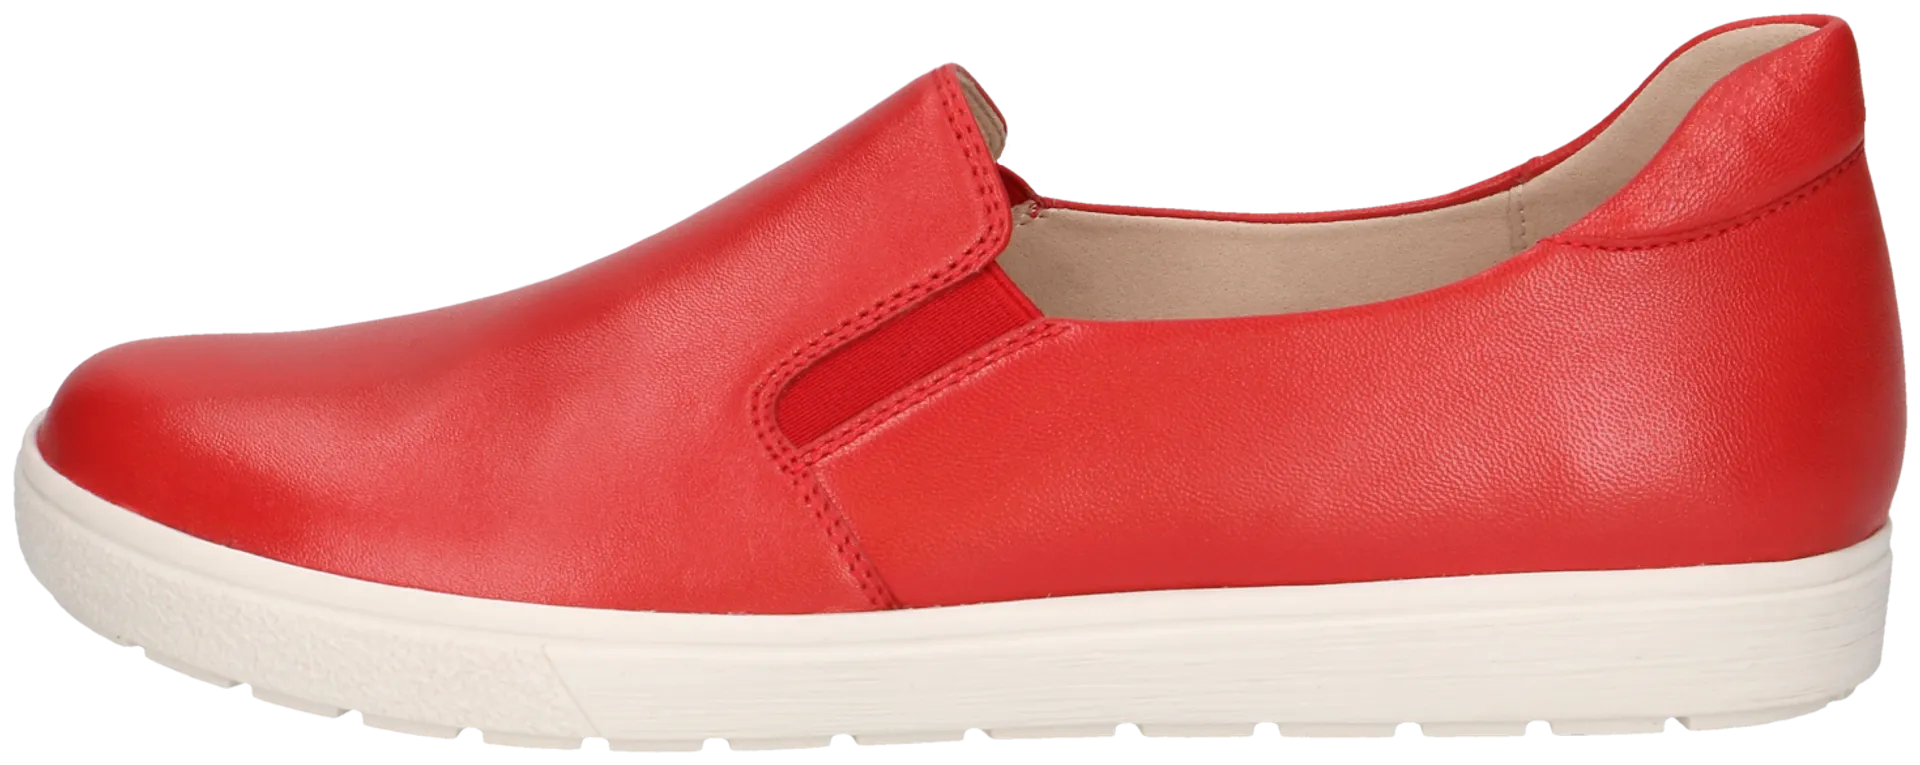 Caprice naisten loafer - Red softnappa - 4